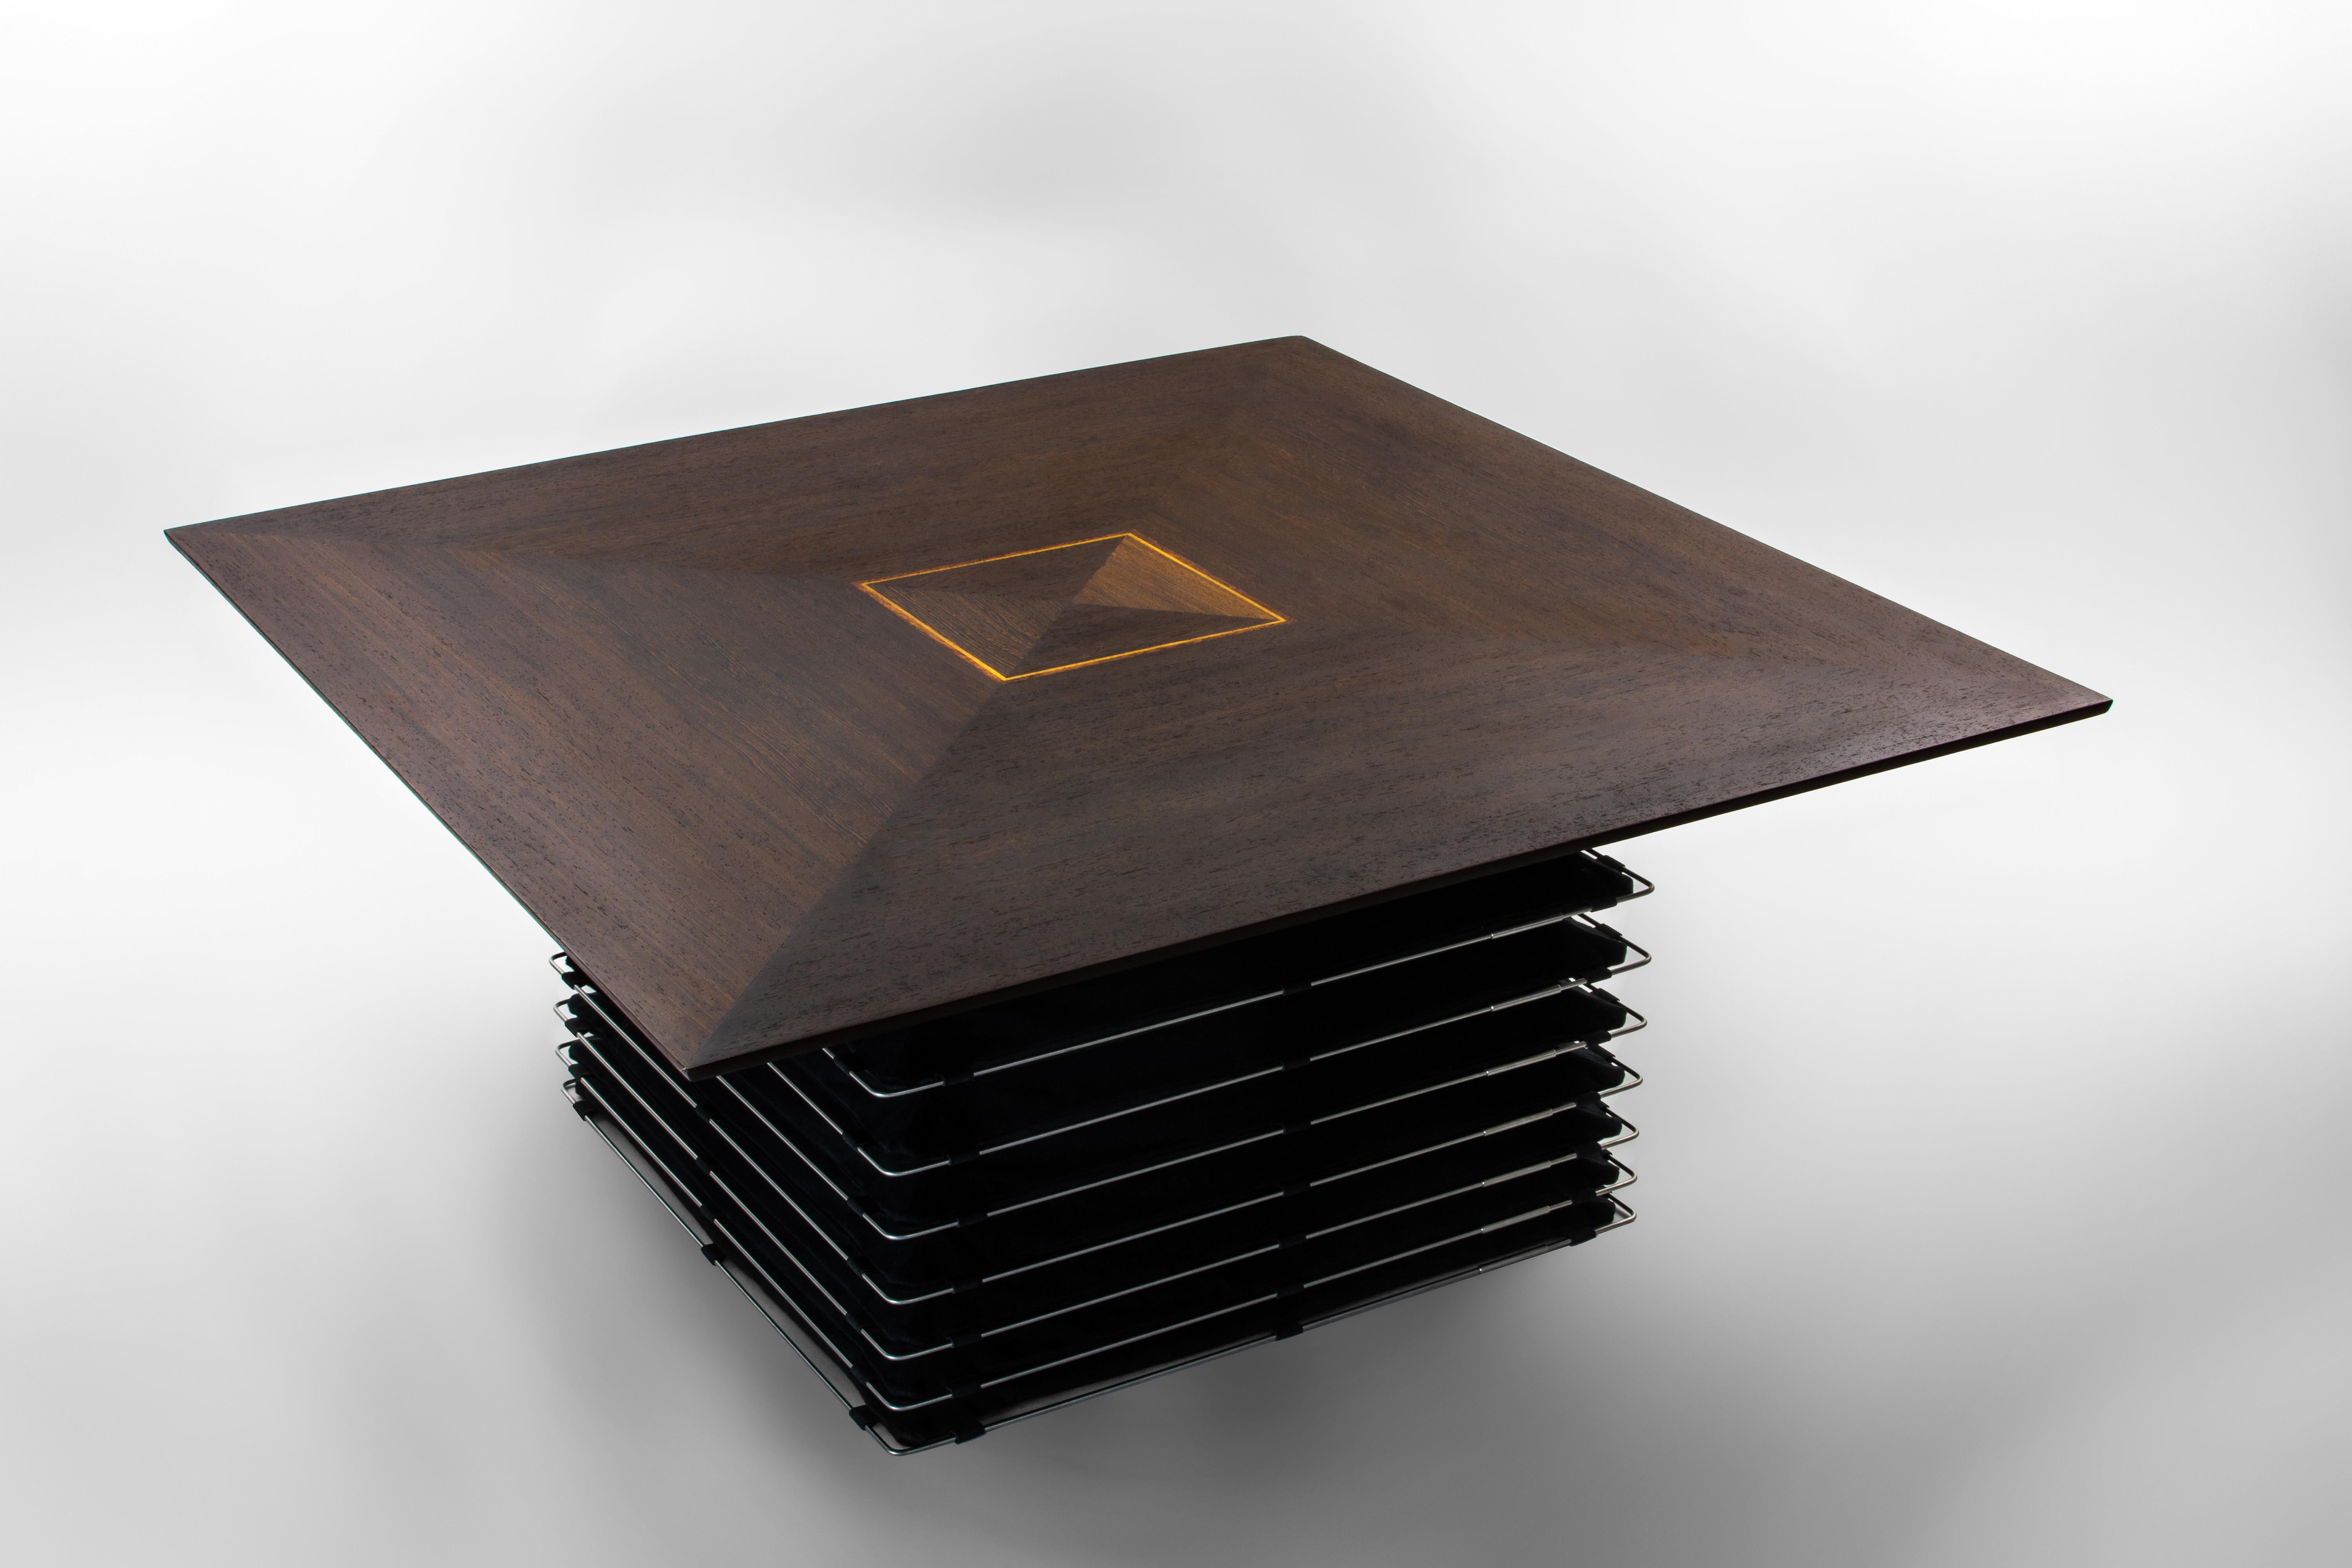 The coffee table from our Finish Collection is a striking and unique piece of furniture that boasts meticulous craftsmanship and design elements. The table's square top features a classic mosaic pattern, divided into four triangle sections, that